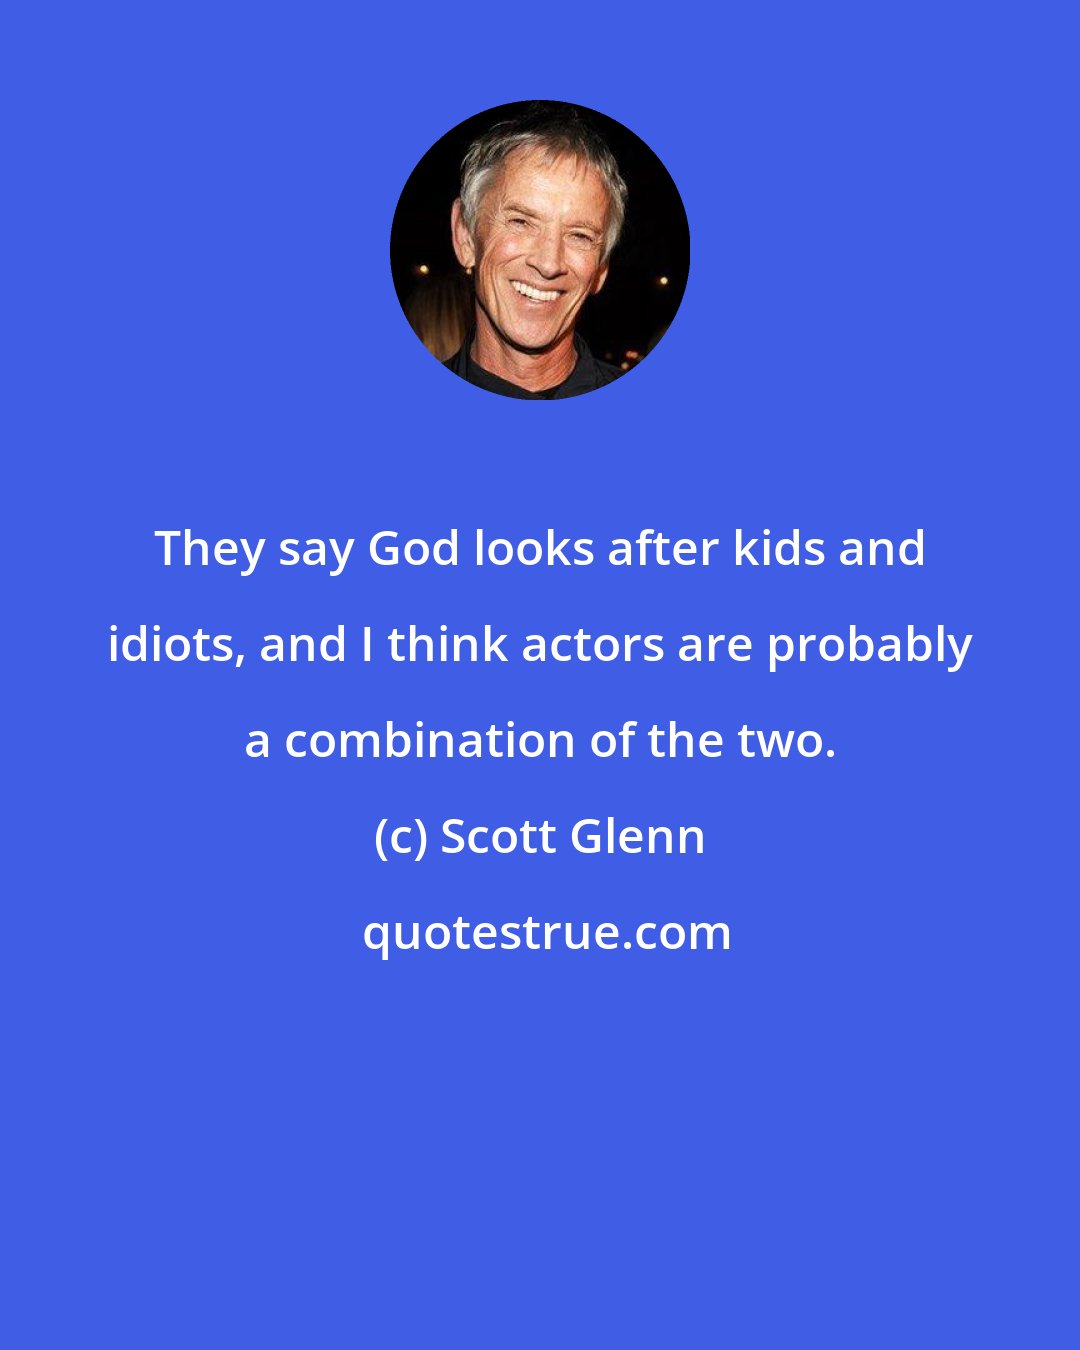 Scott Glenn: They say God looks after kids and idiots, and I think actors are probably a combination of the two.